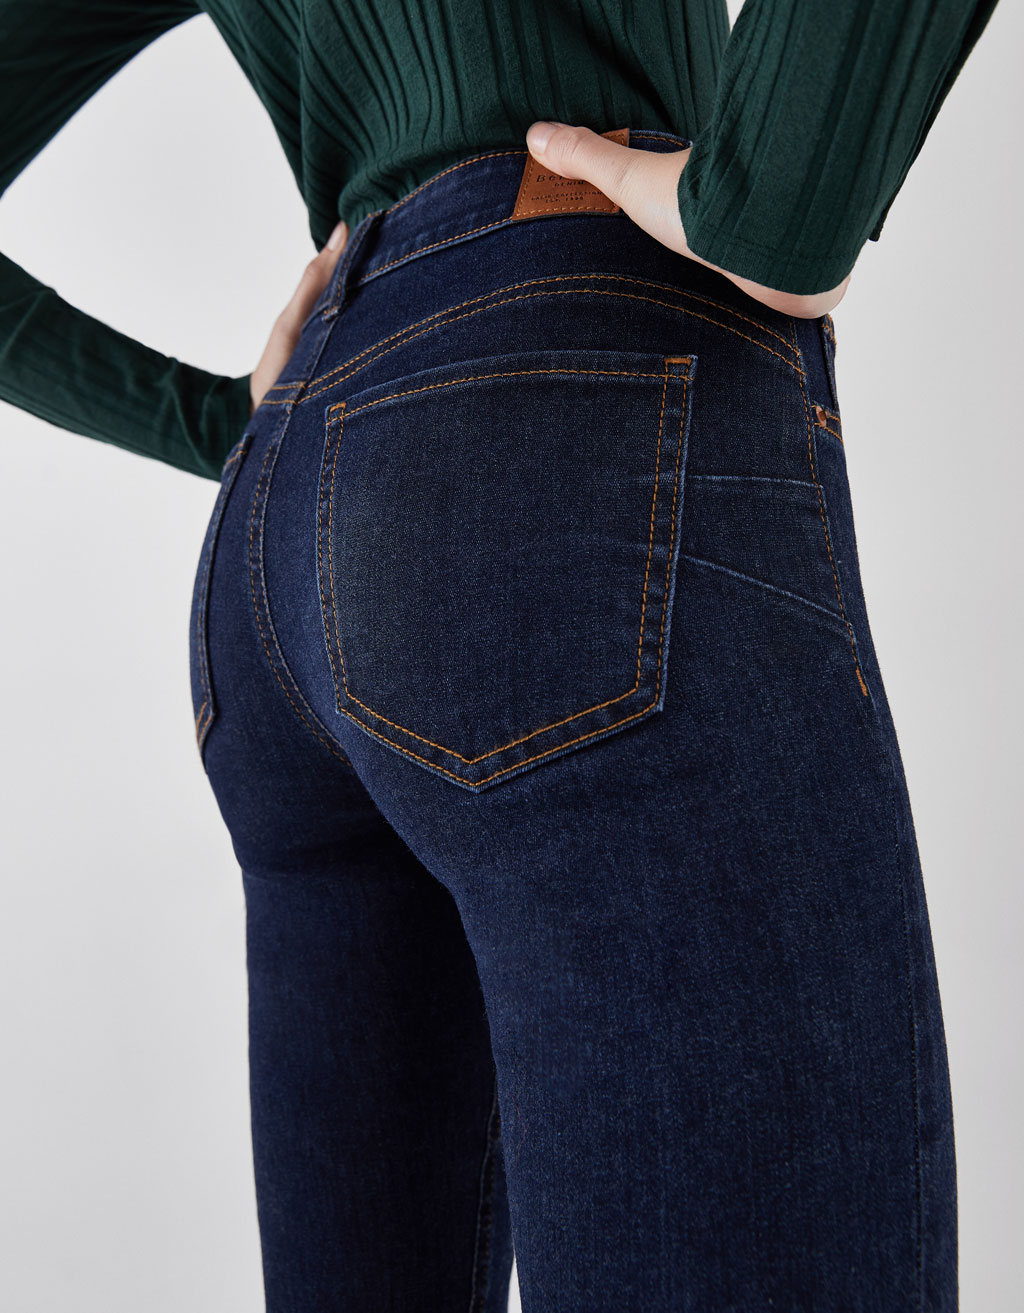 low rise push up jeans